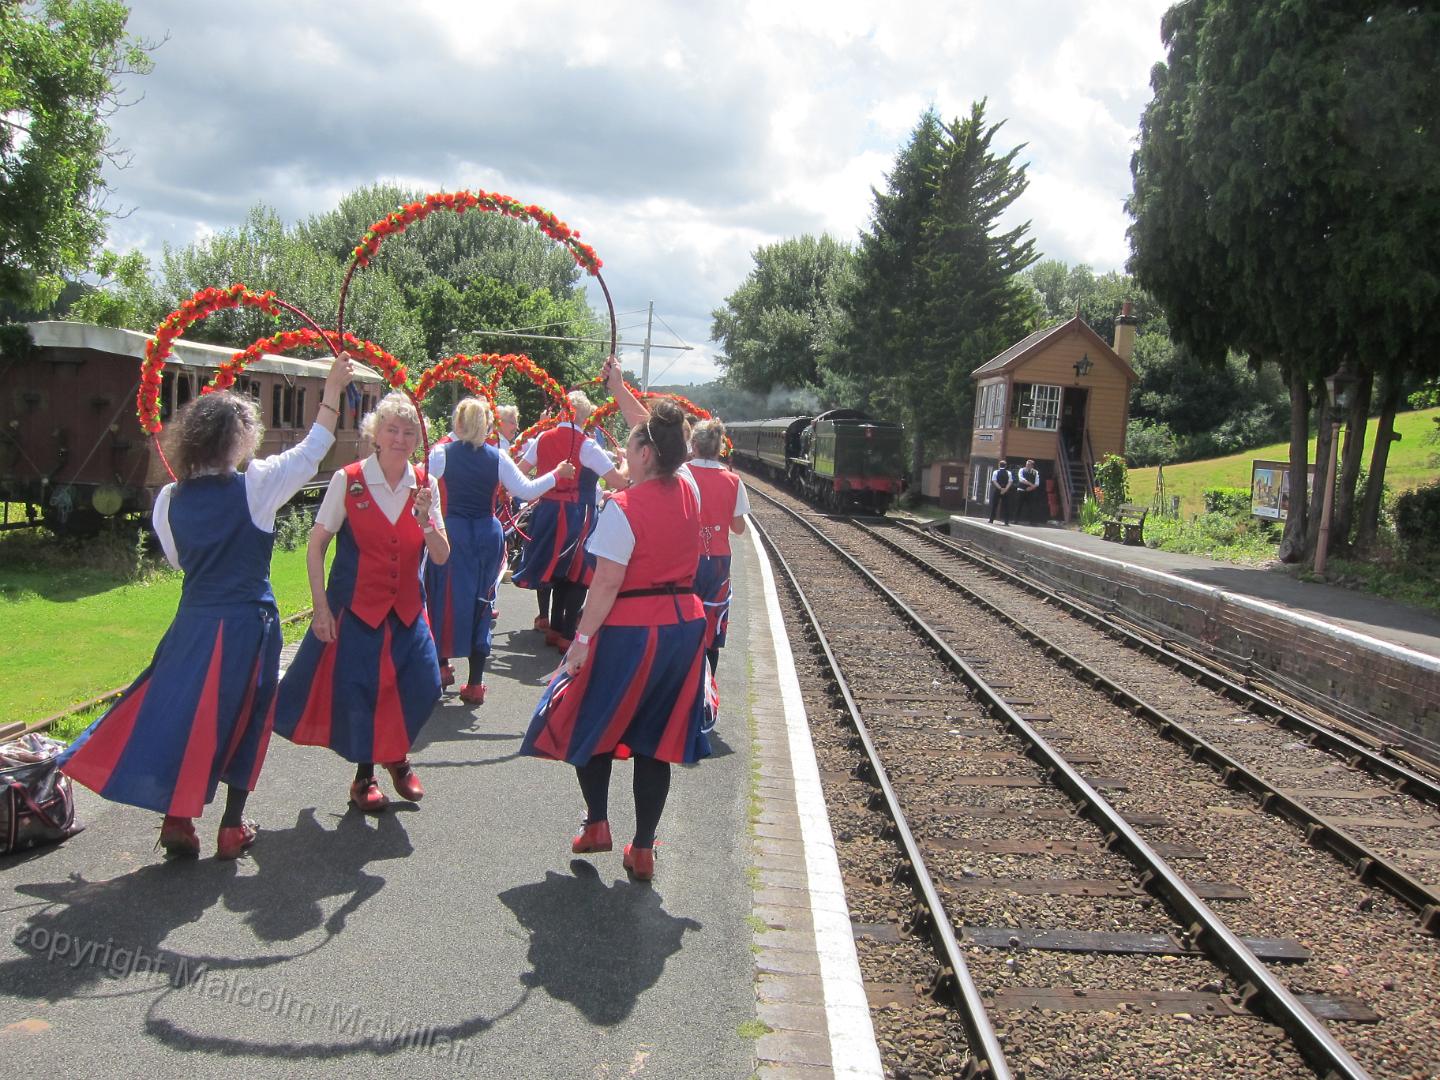 dancing on the platform at Hampton Loade as a train steams in from the opposite direction